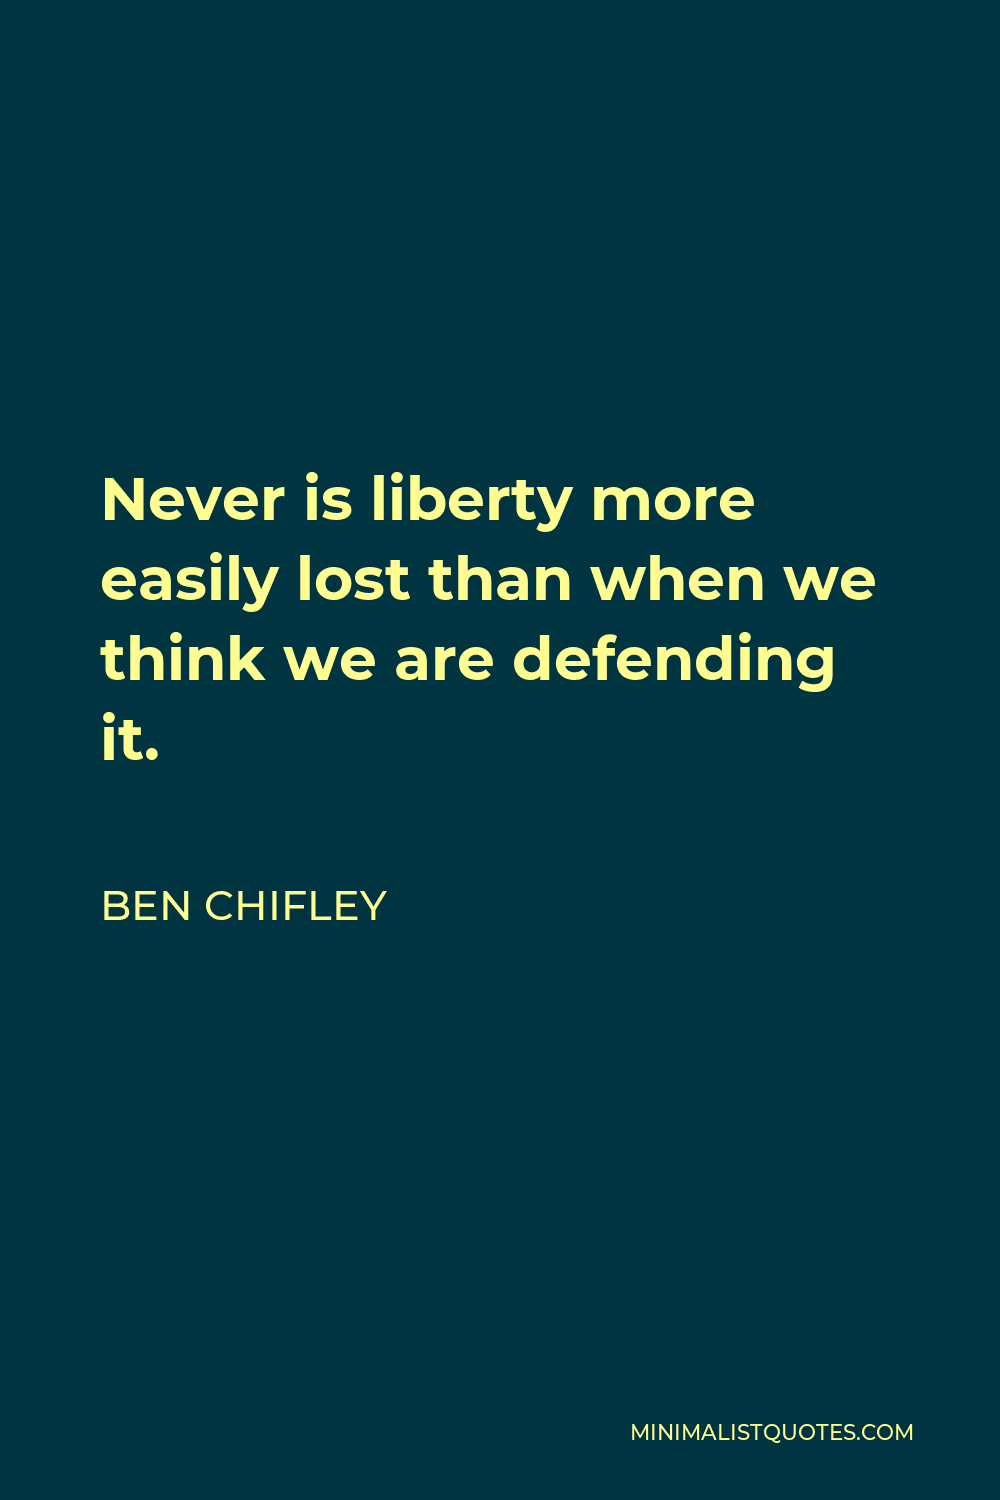 Ben Chifley Quote - Never is liberty more easily lost than when we think we are defending it.